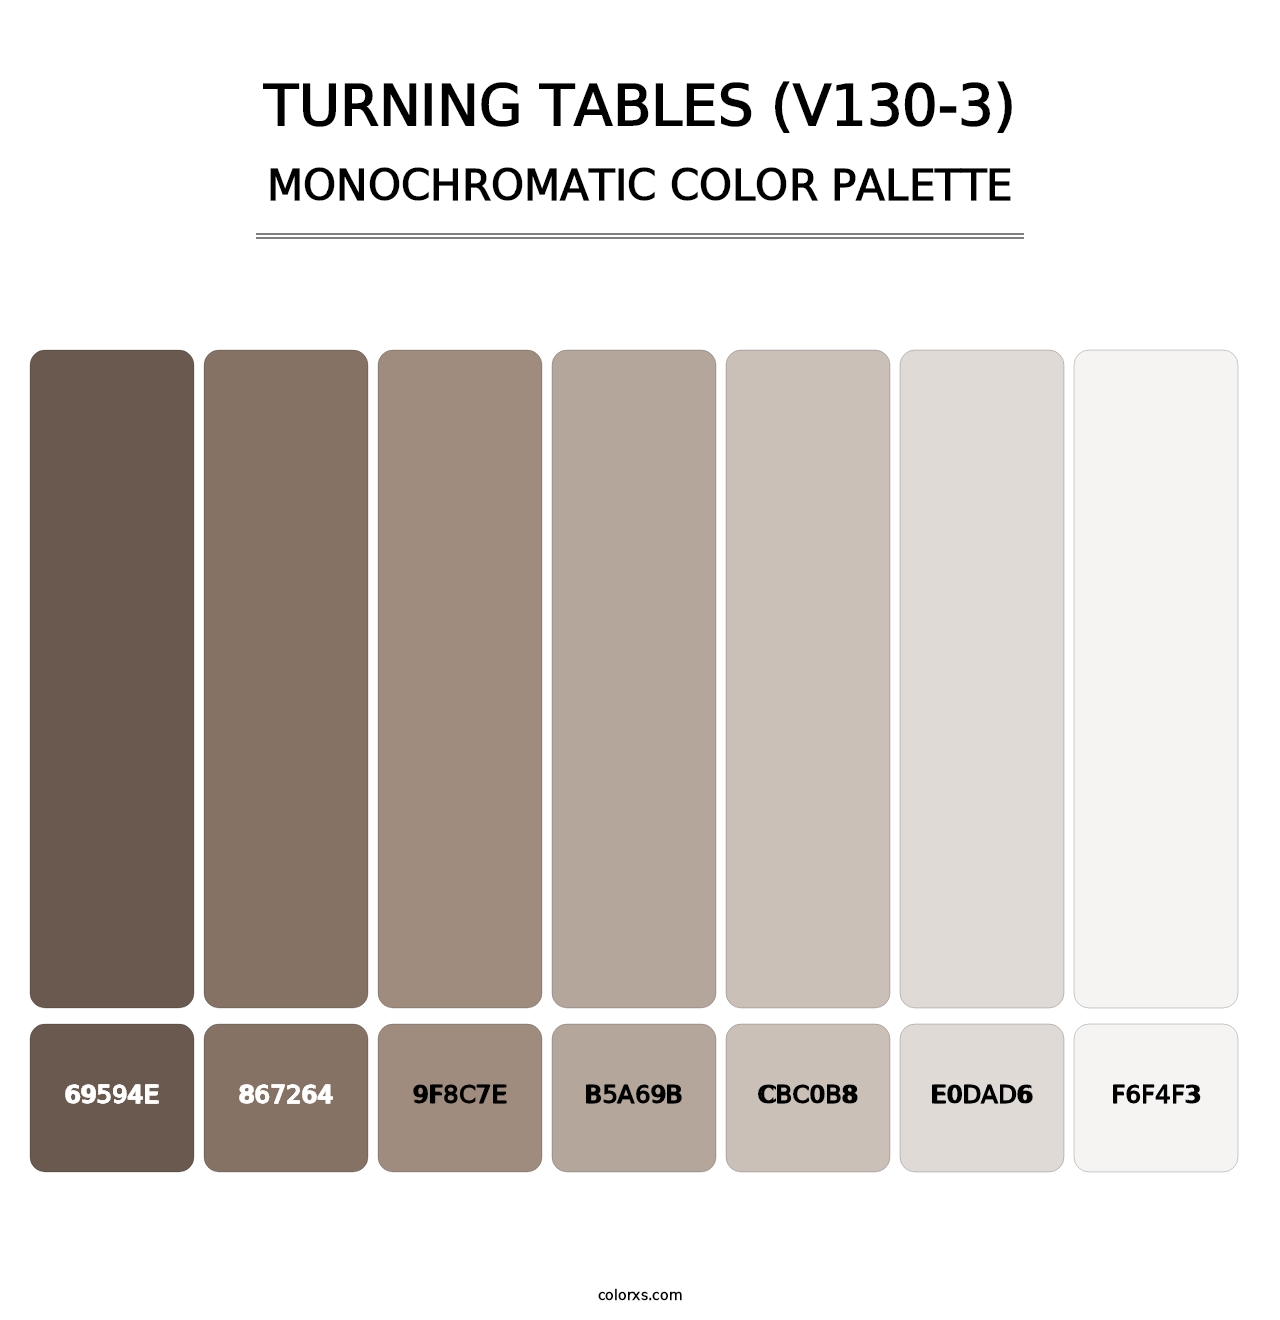 Turning Tables (V130-3) - Monochromatic Color Palette